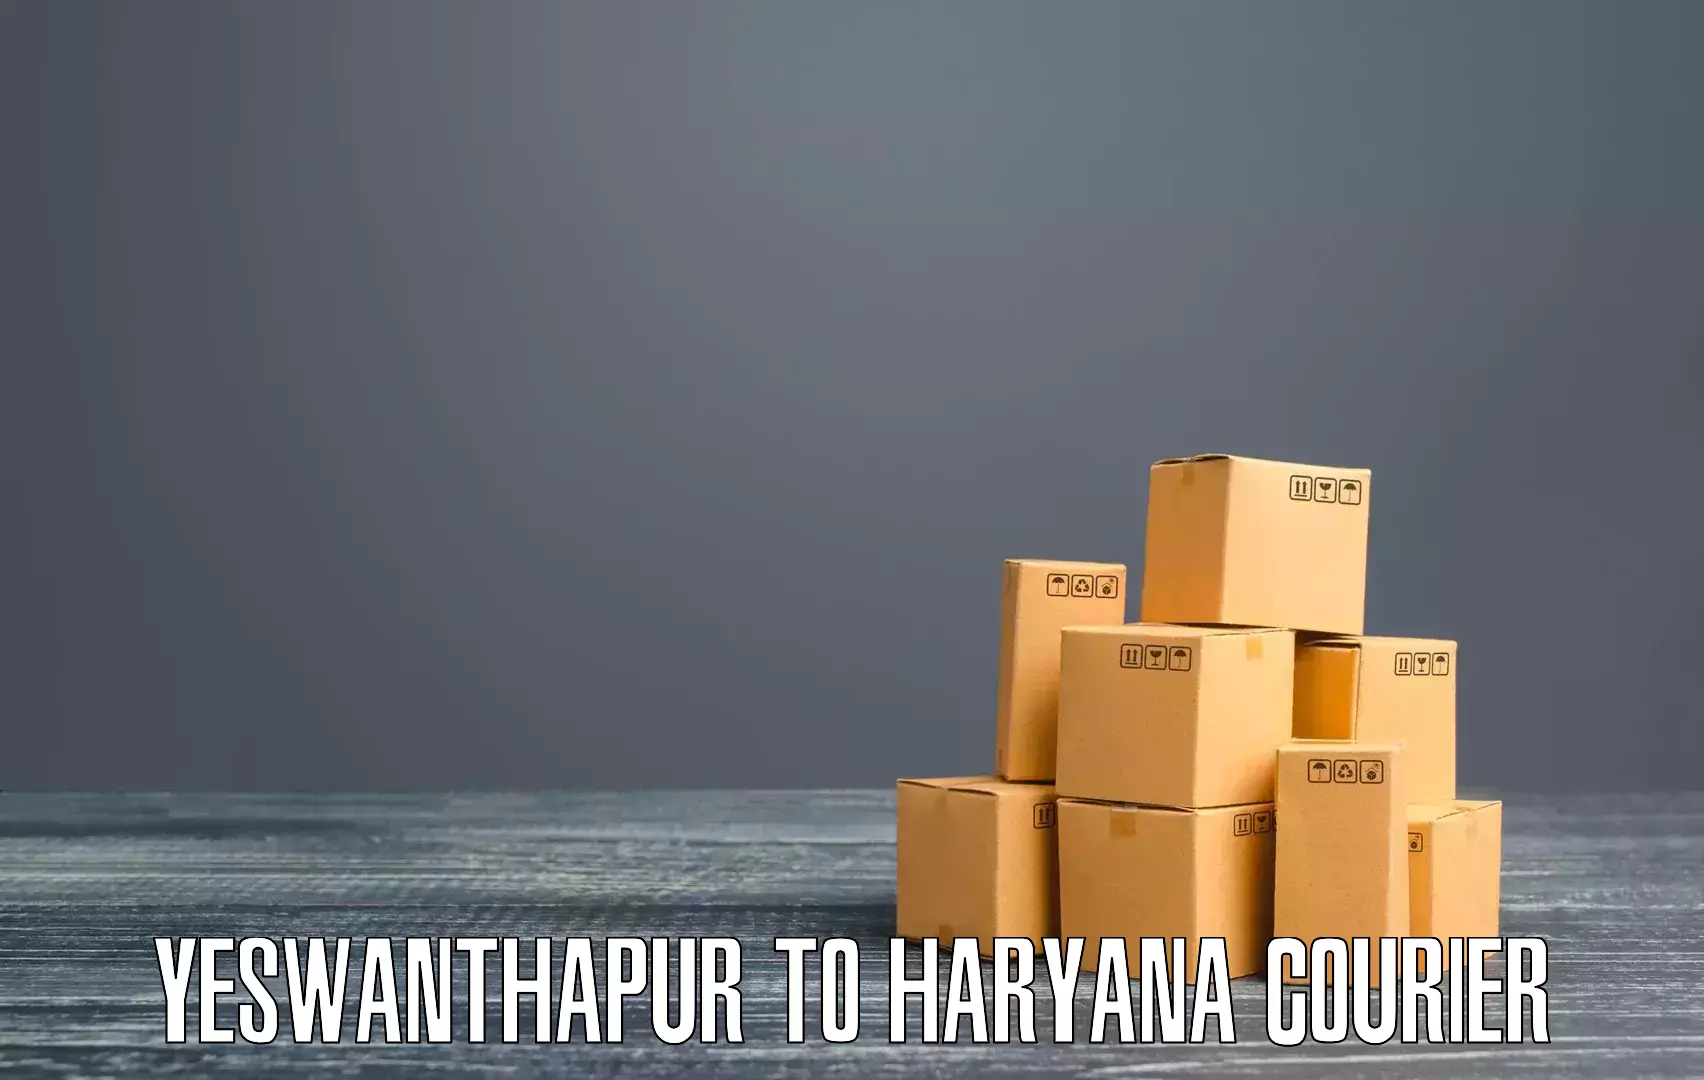 Courier app Yeswanthapur to Dharuhera